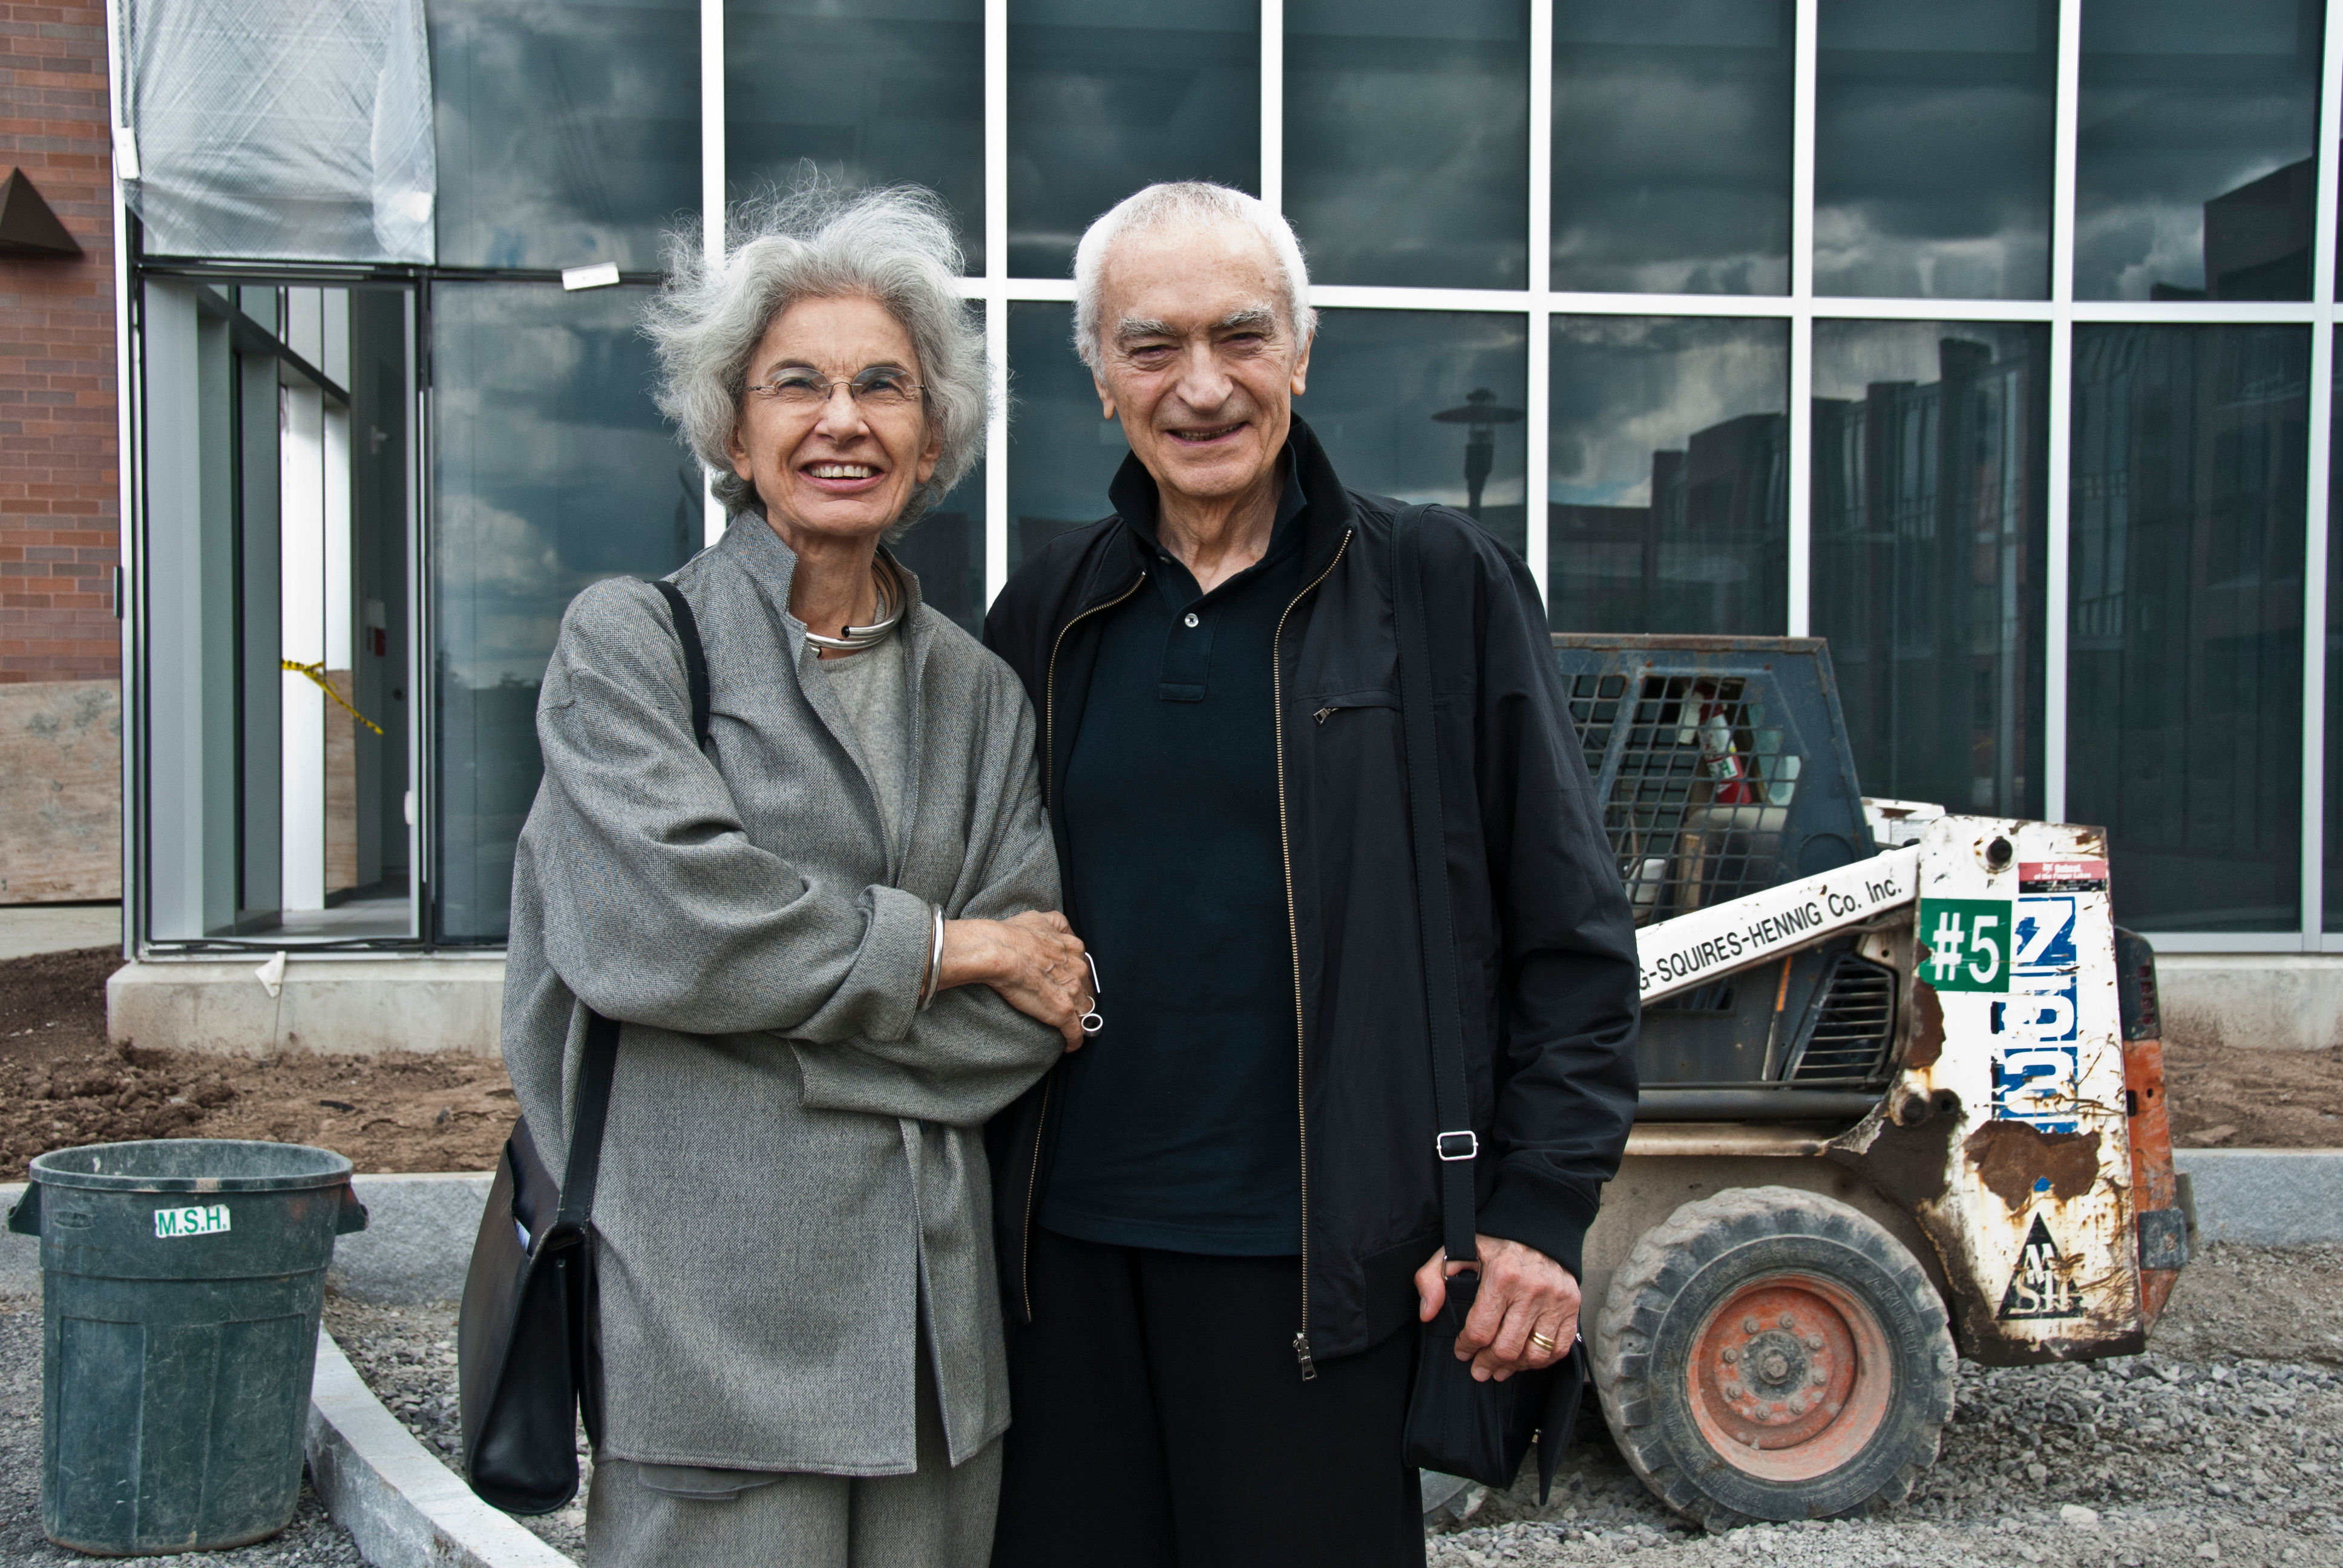 Lella and Massimo standing in front of the Vignelli Center for Design Studies during construction. 2010